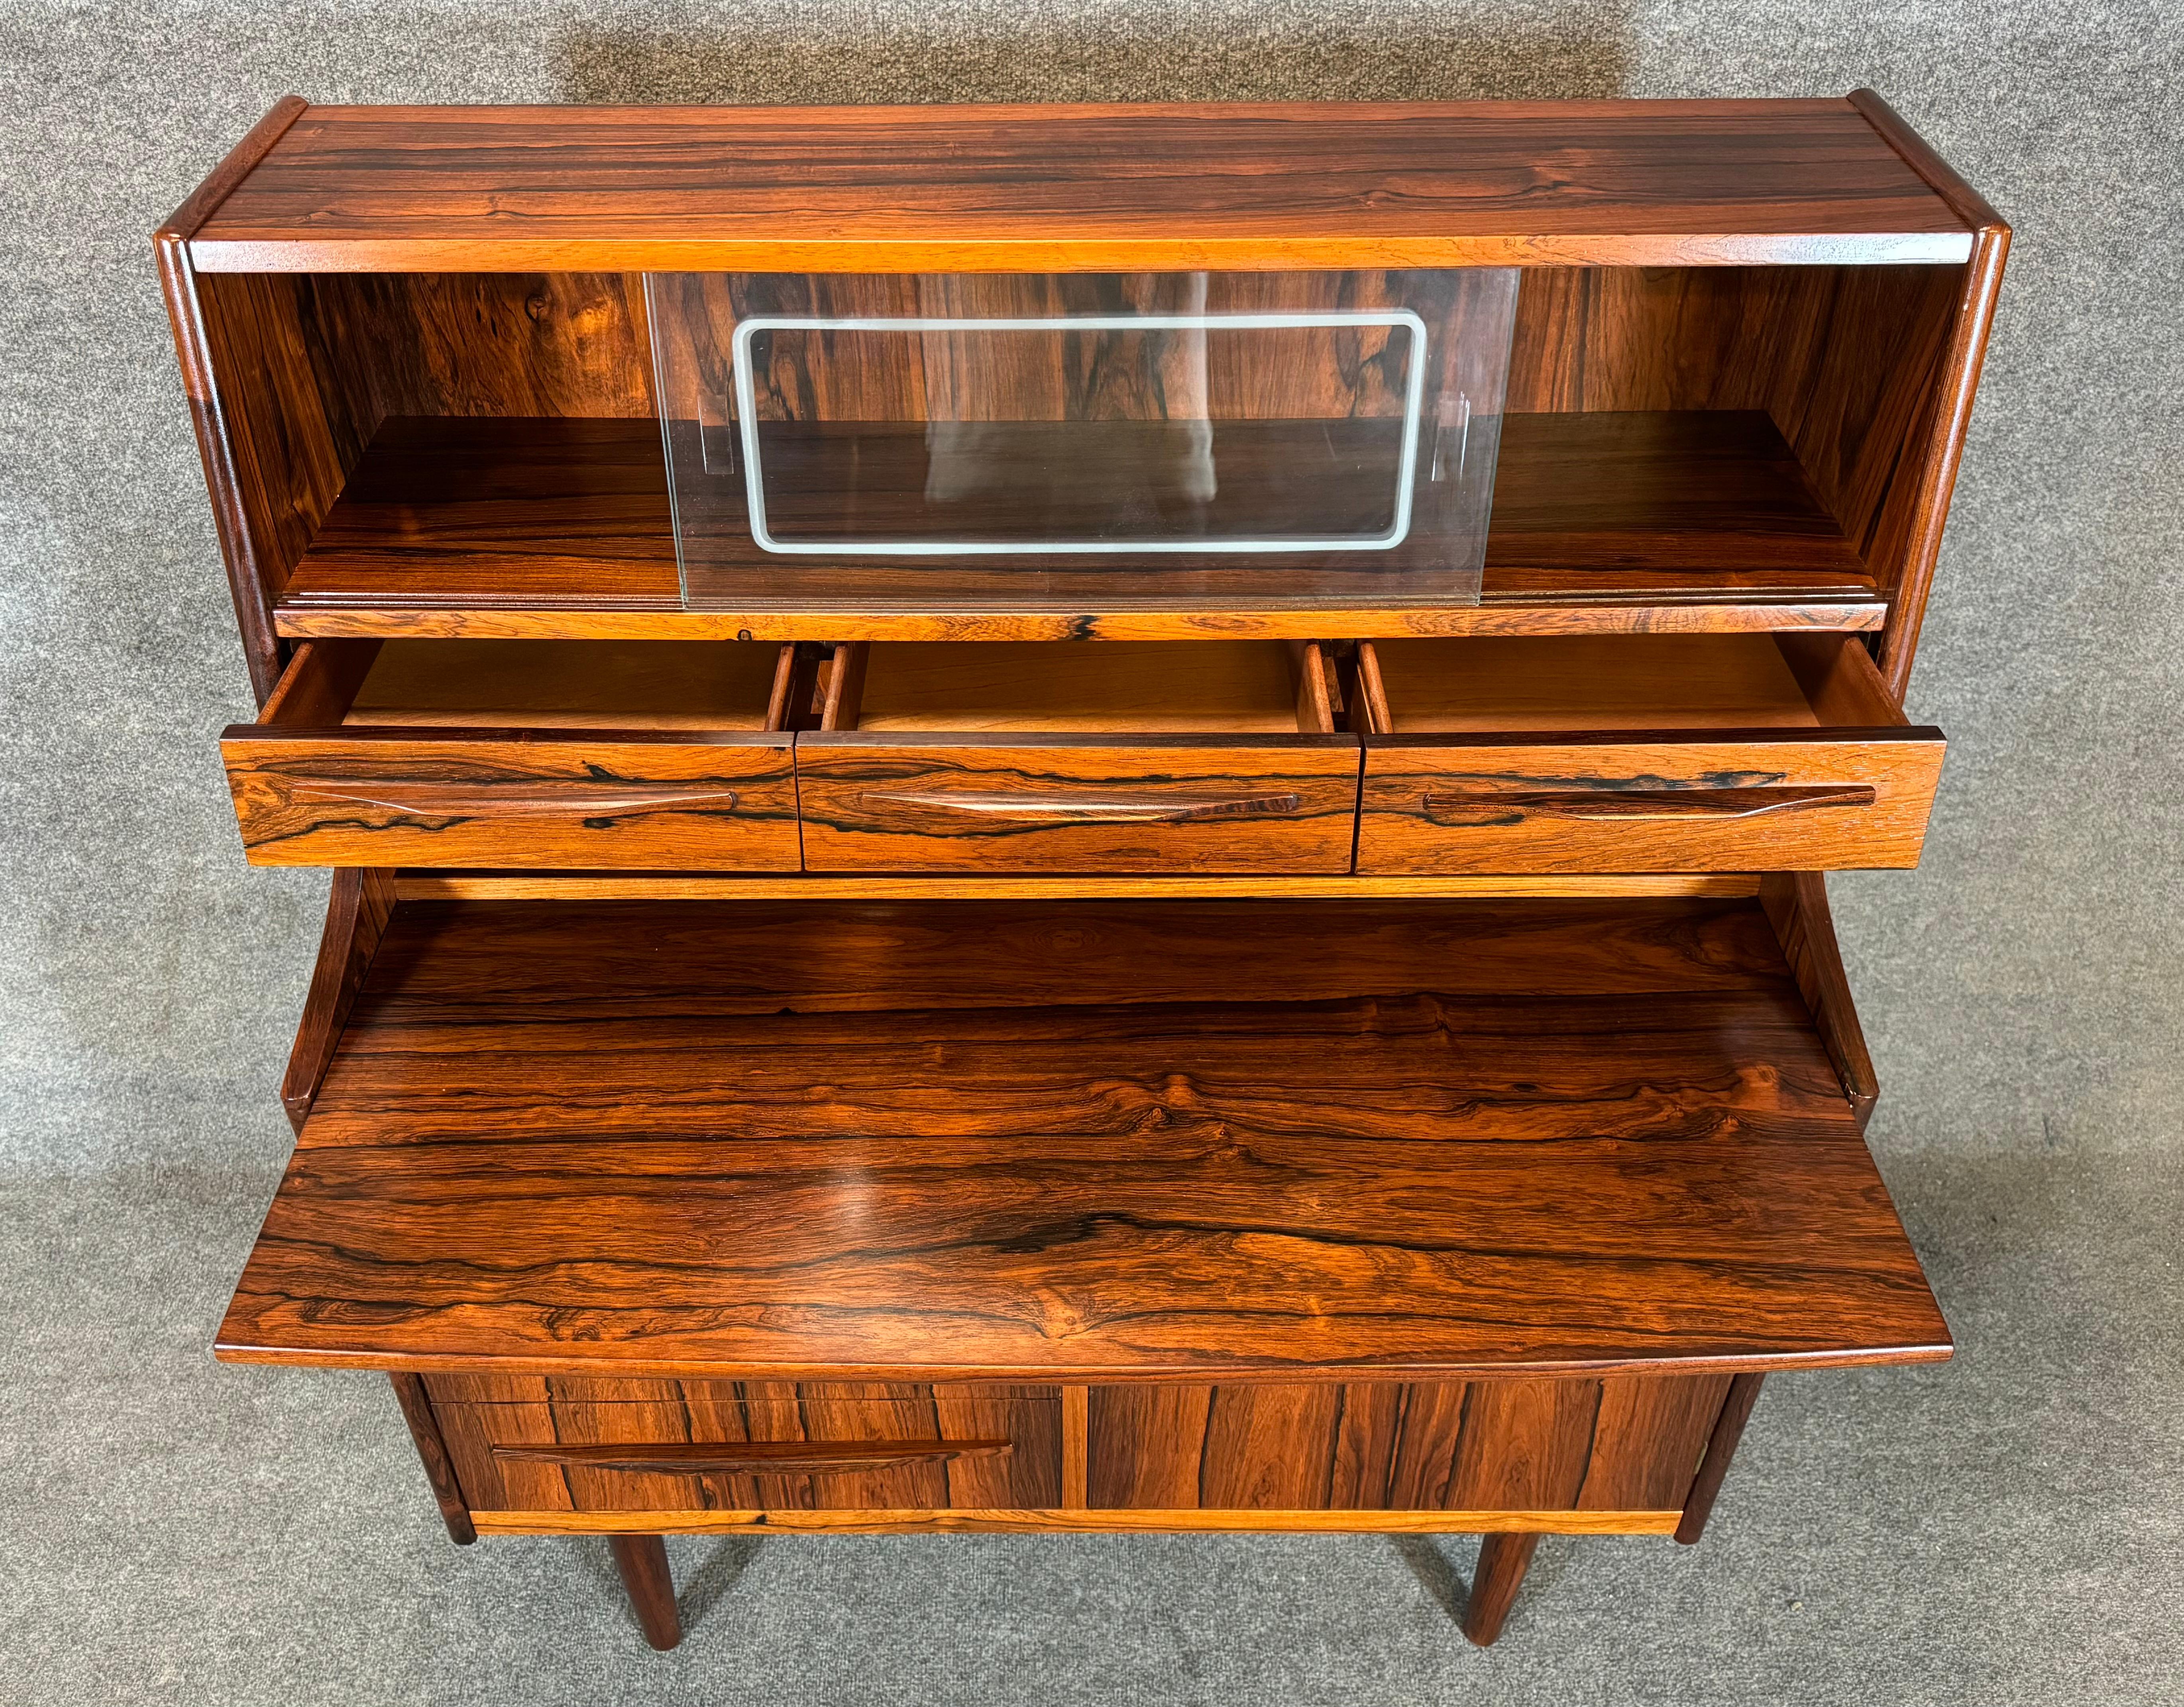 Here is a beautiful scandinavian modern secretary desk in rosewood attributed to Gunnar Falsig, Denmark, 1960's.
This exquisite piece, recently imported from Europe to California before its refinishing, features a vibrant wood grain, a slide our